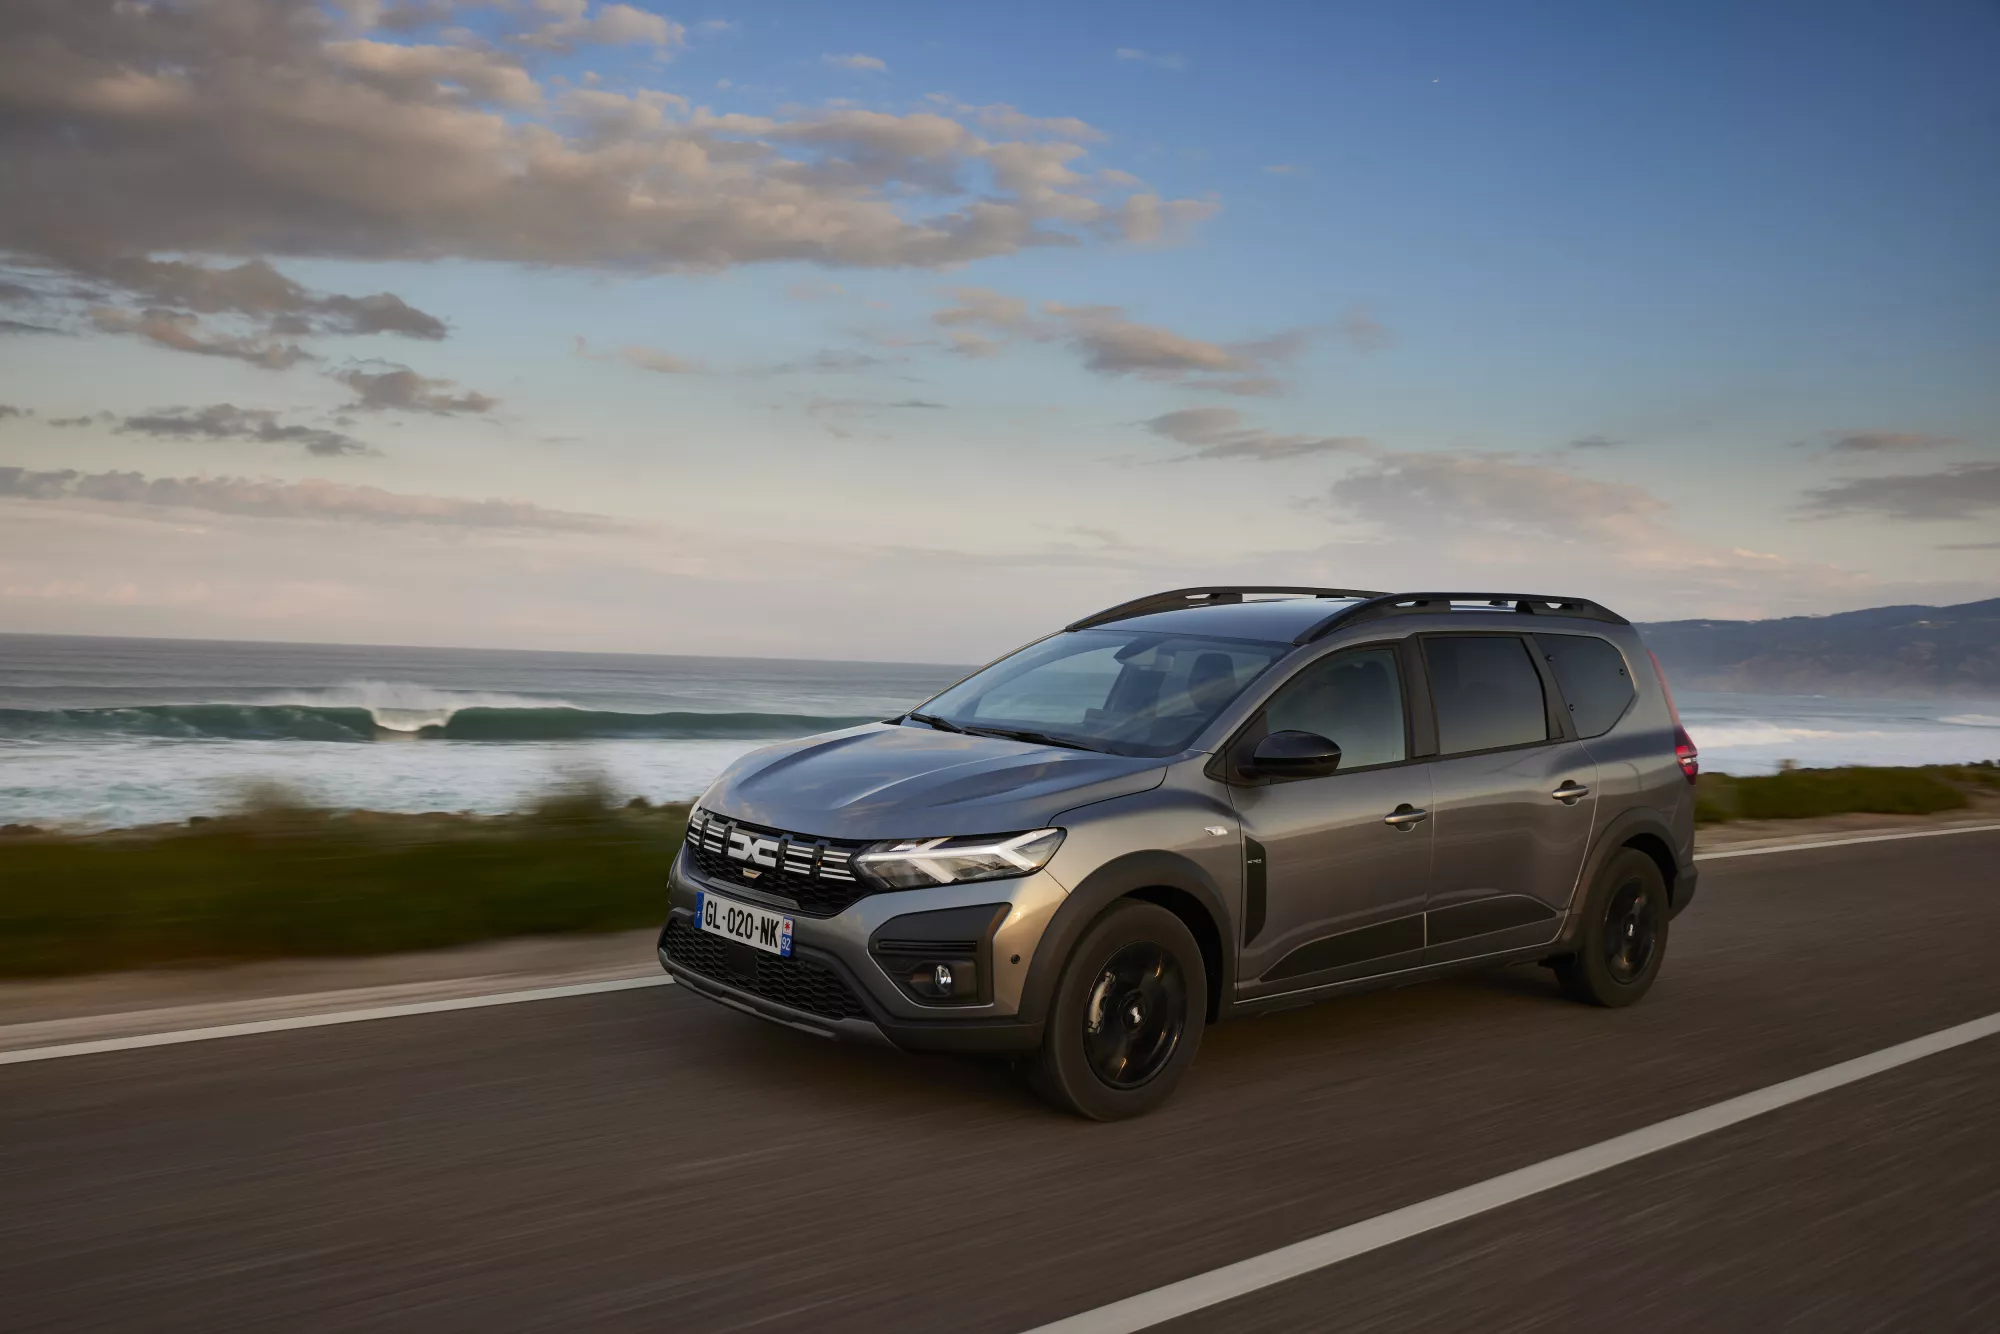 Dacia's All-New Jogger Is Officially Europe's Cheapest 7-Seater Model